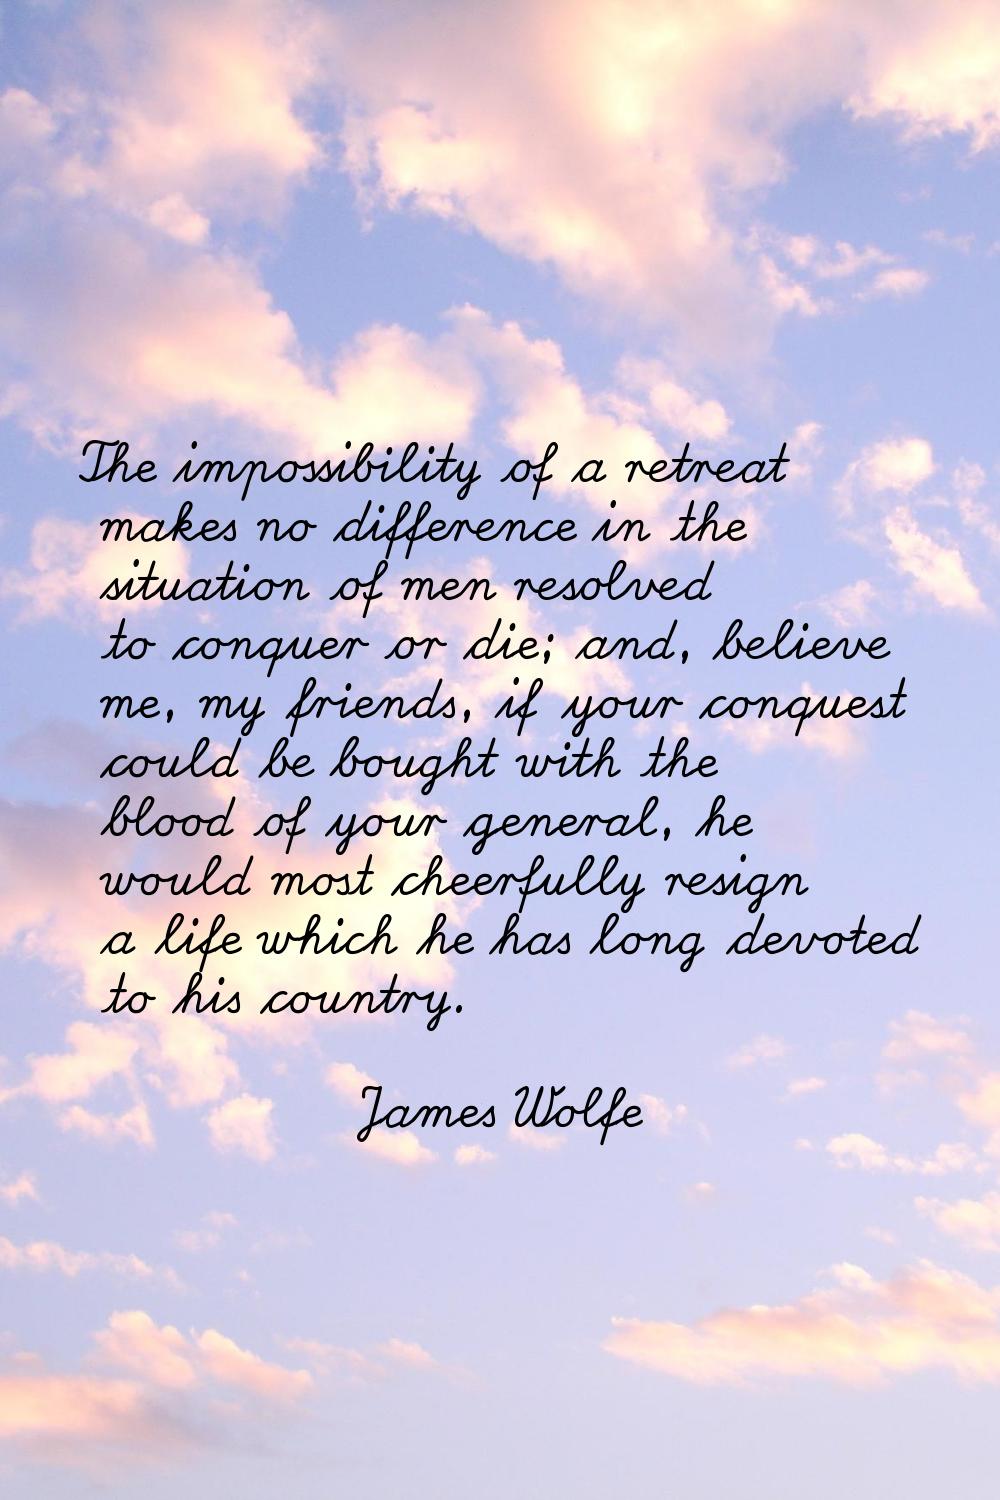 The impossibility of a retreat makes no difference in the situation of men resolved to conquer or d